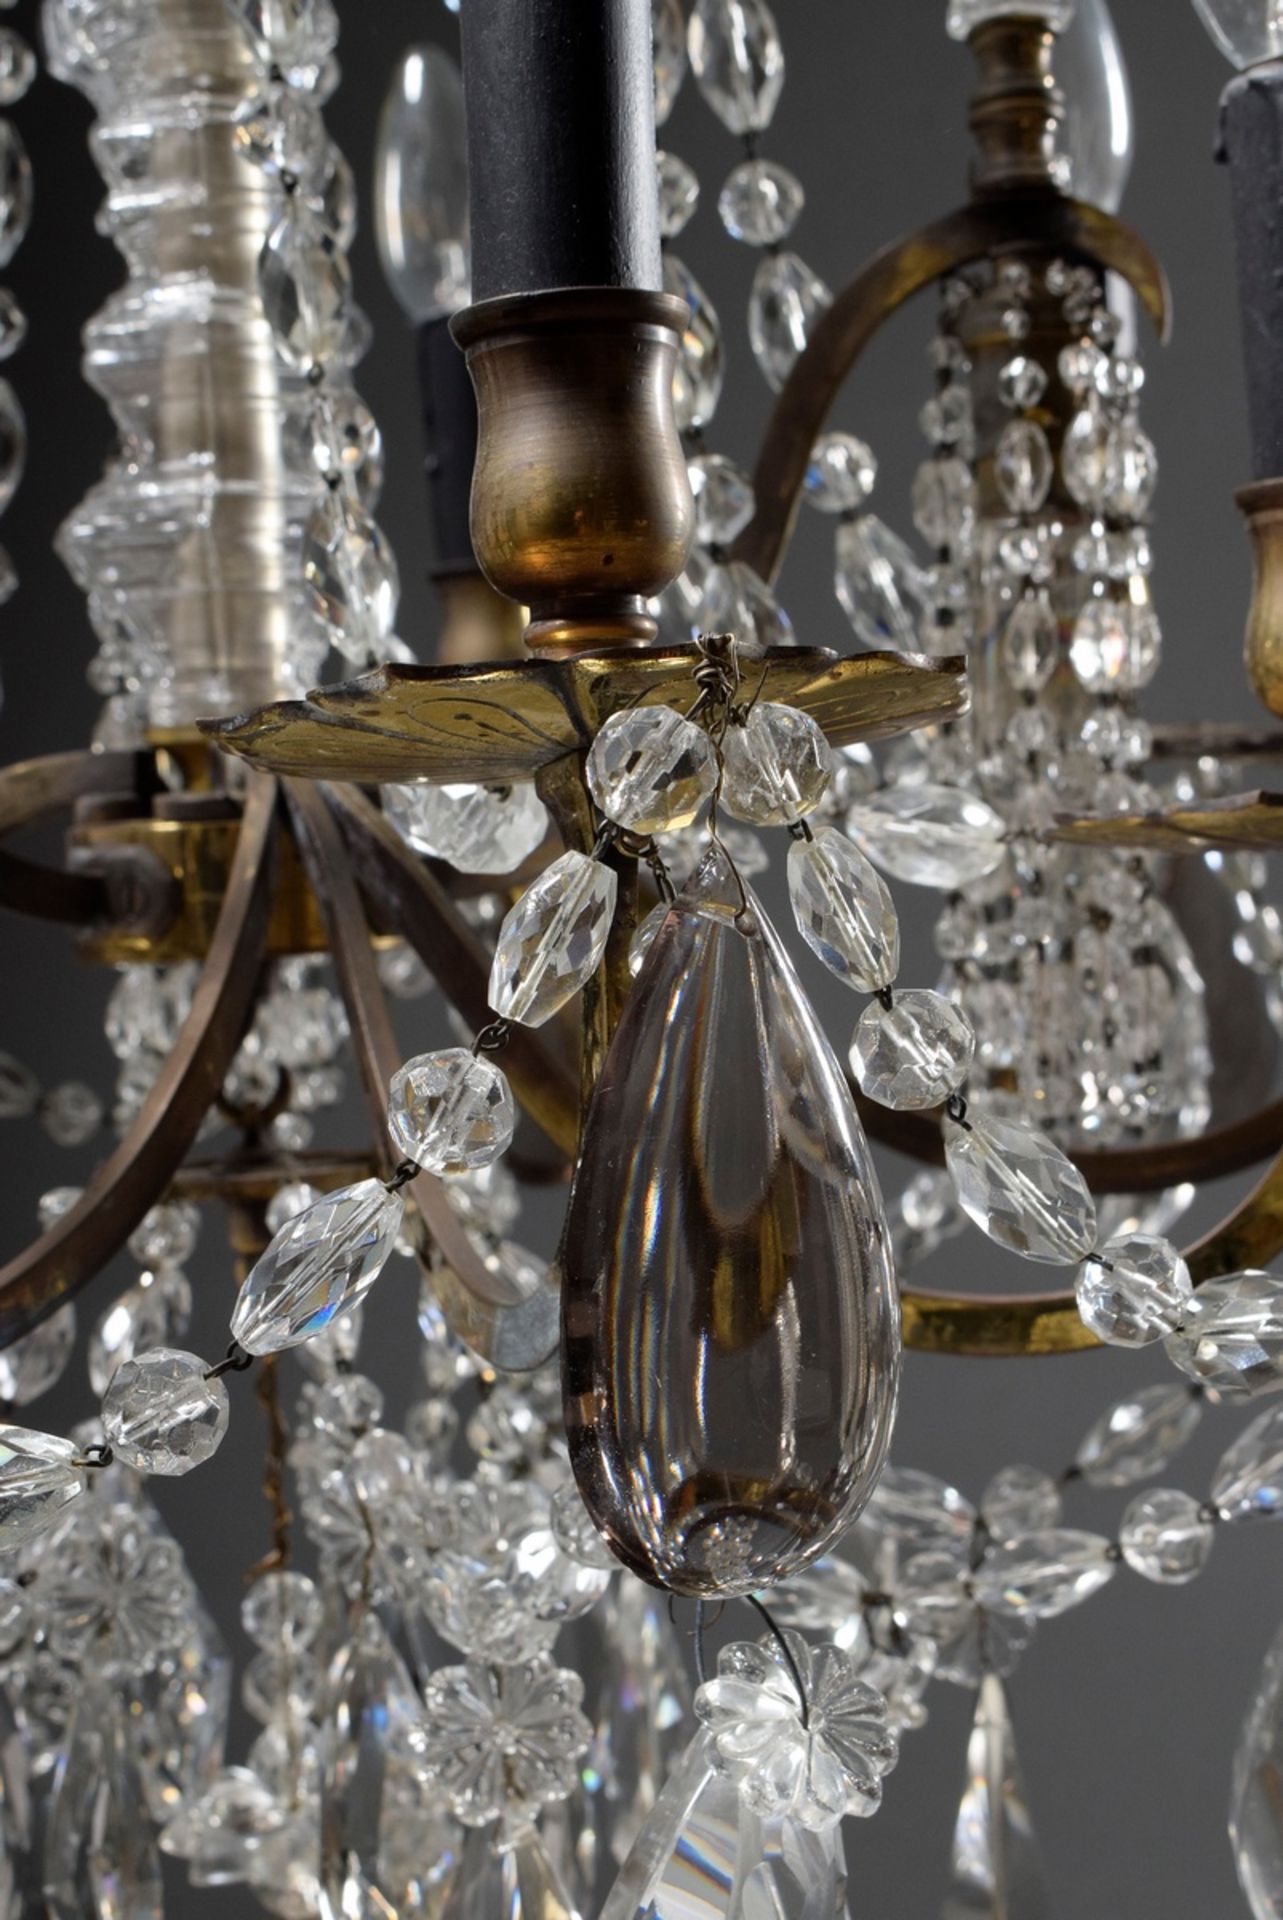 Fire-gilt bronze chandelier with elaborate prismatic hangings and cut balusters on a triangular bas - Image 6 of 9